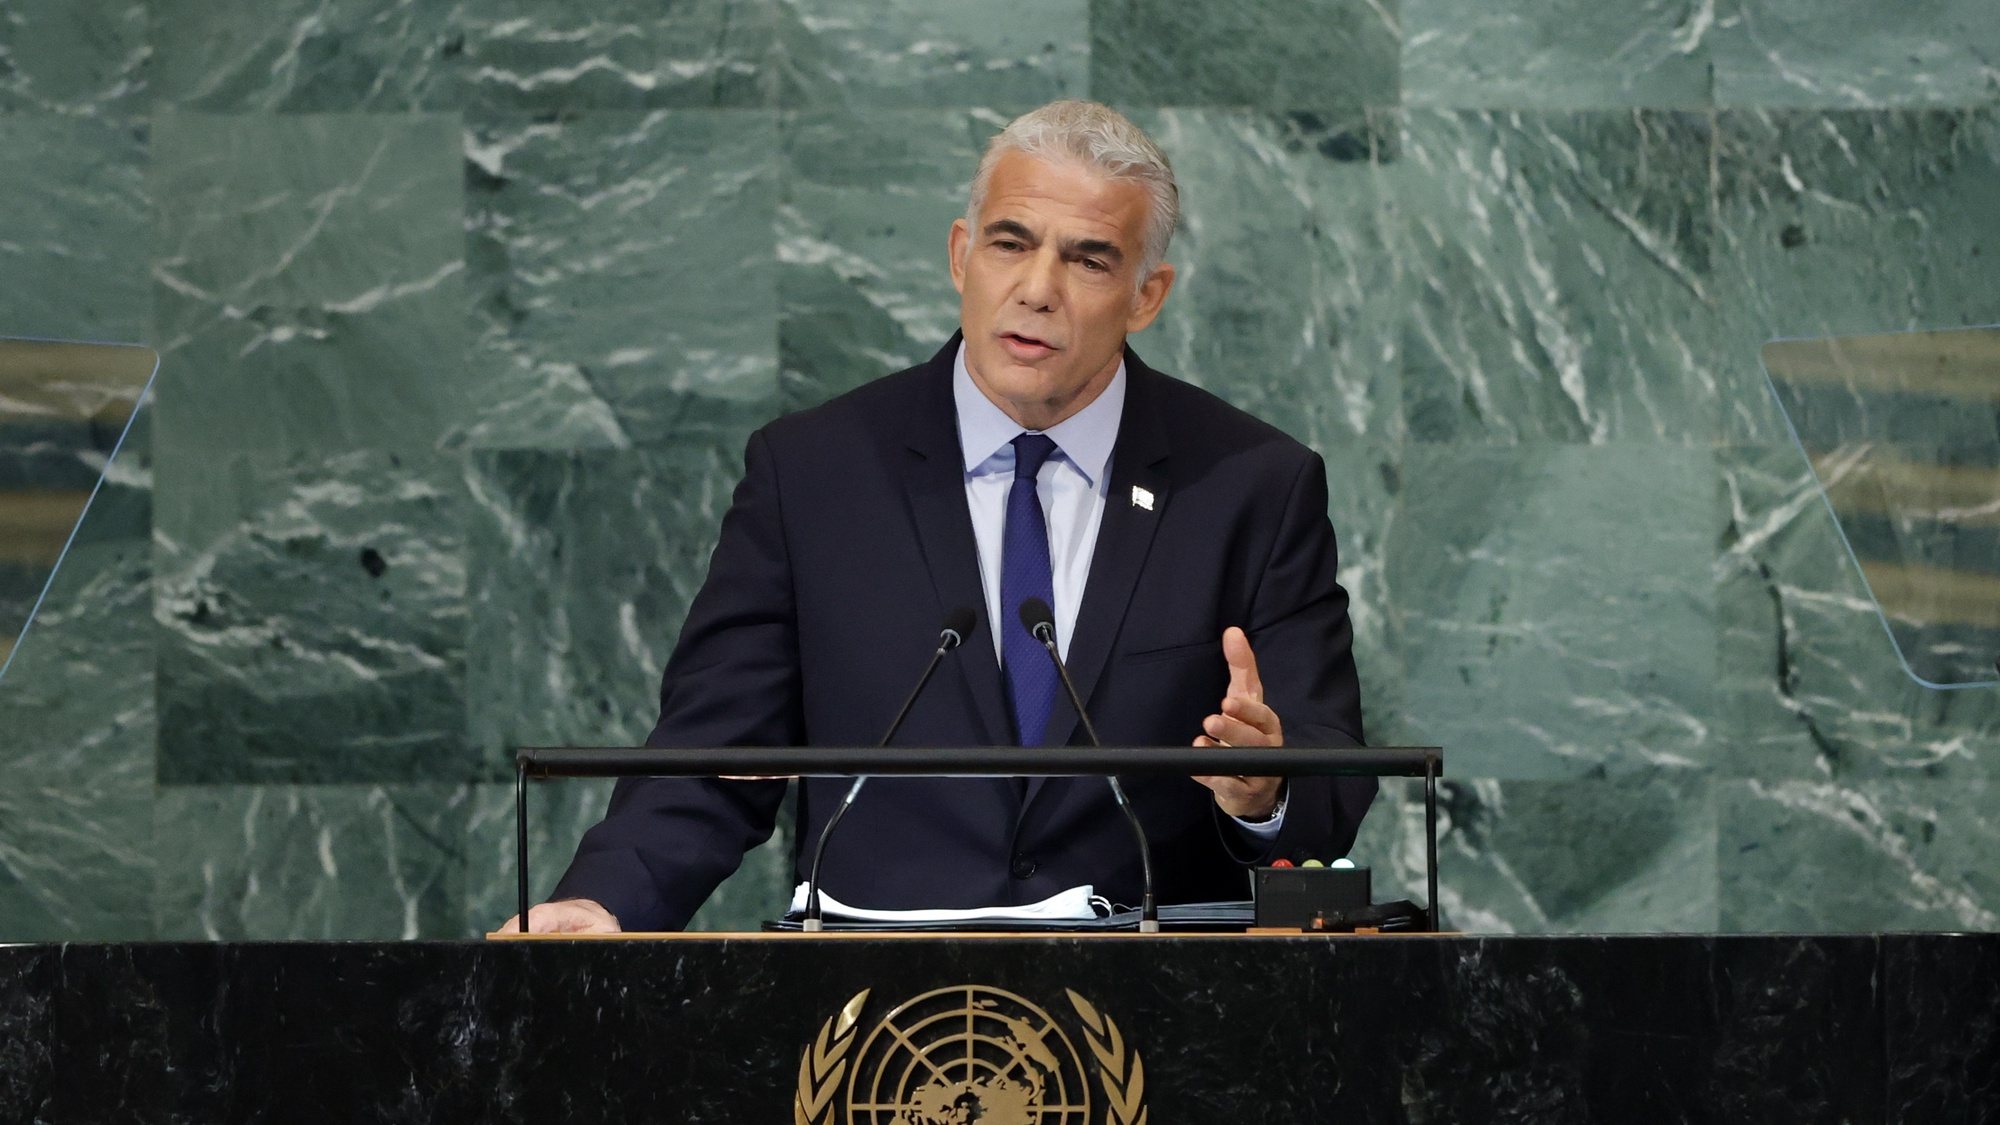 epa10199524 Yair Lapid, Prime Minister and Minister for Foreign Affairs of the State of Israel, delivers his address during the 77th General Debate inside the General Assembly Hall at United Nations Headquarters in New York, New York, USA, 22 September 2022.  EPA/JASON SZENES